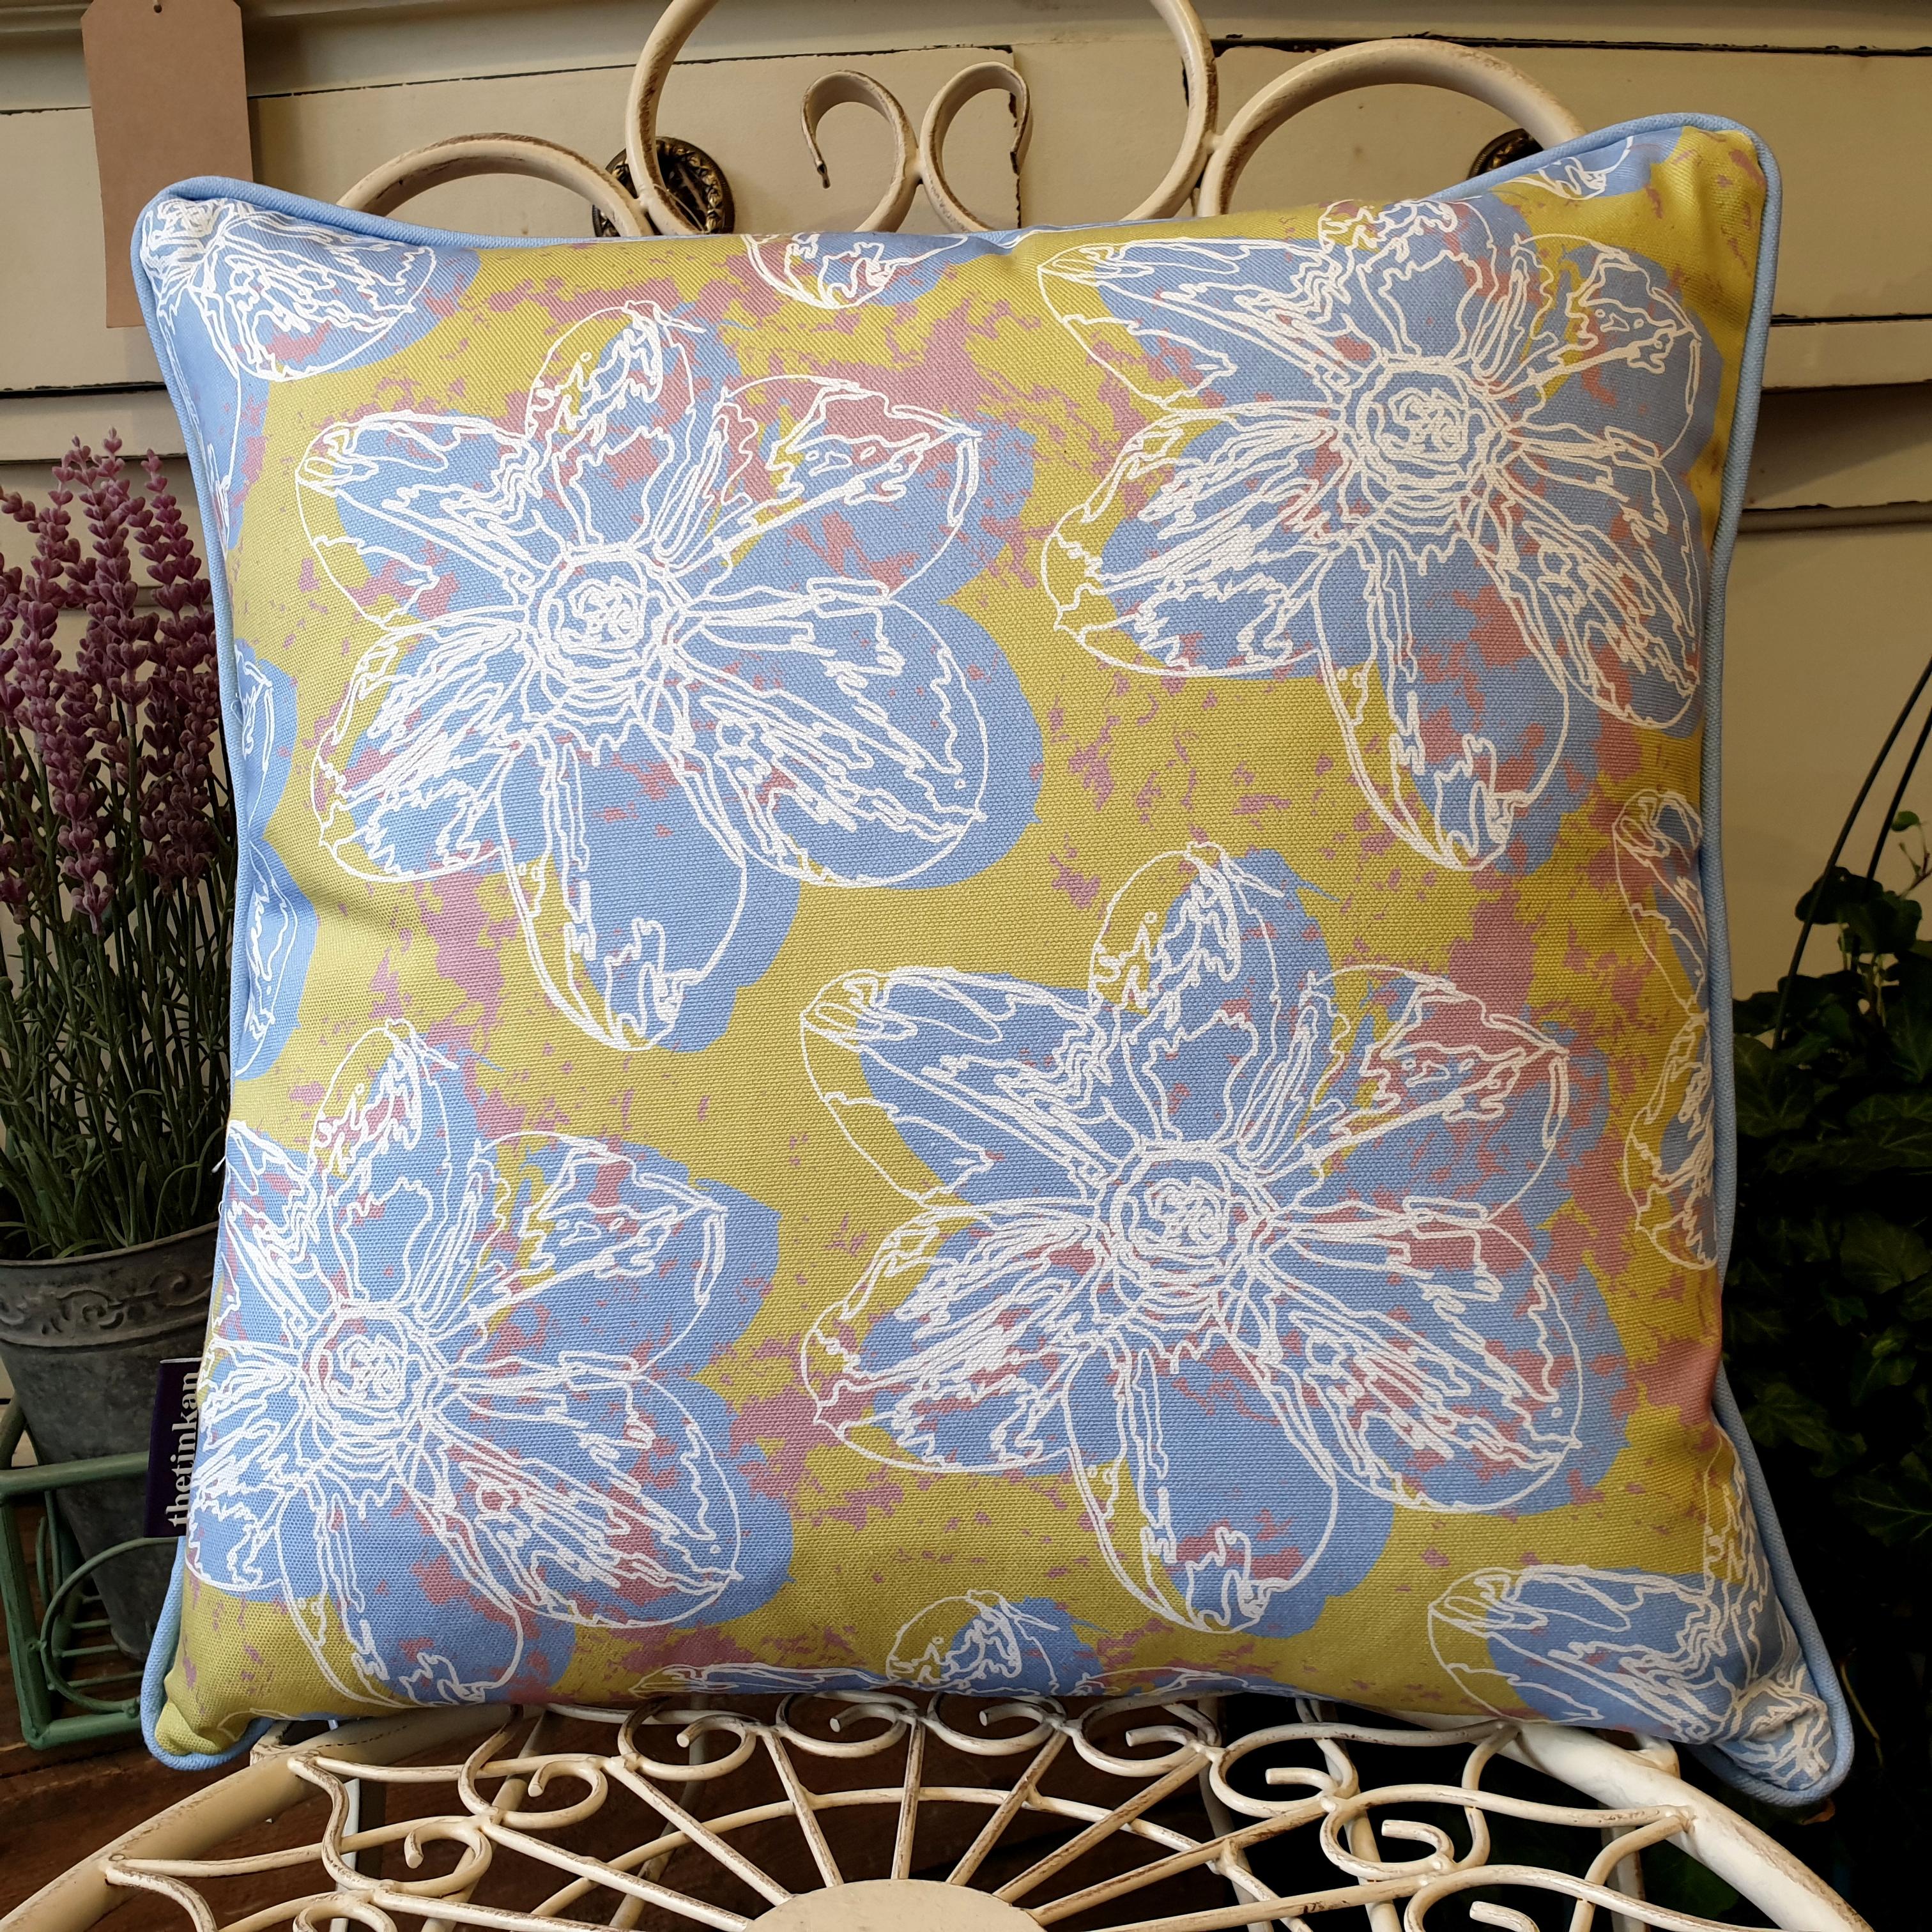 Double-sided 45cm square Flower Splash cushion designed by thetinkan. Pale blue narcissus flower and pale blue piping with white traced outline set within a light olive green background with salmon pink paint splashes. Available with an optional luxury cushion inner pad. VIEW PRODUCT >>